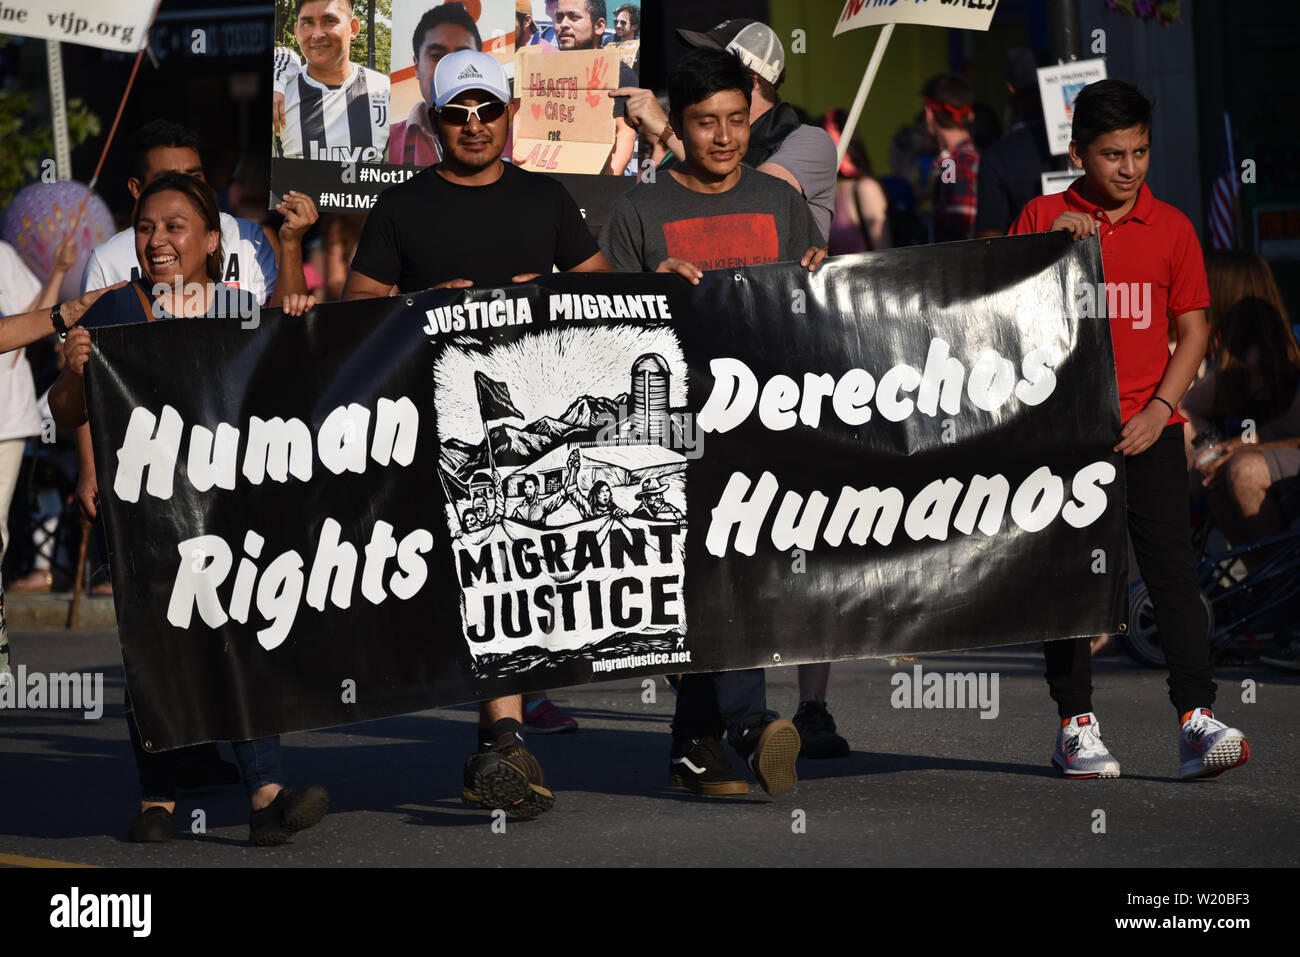 Migrant Justice (organization) supporters march in July 4 parade, held every July 3, Montpelier, VT, USA. Stock Photo